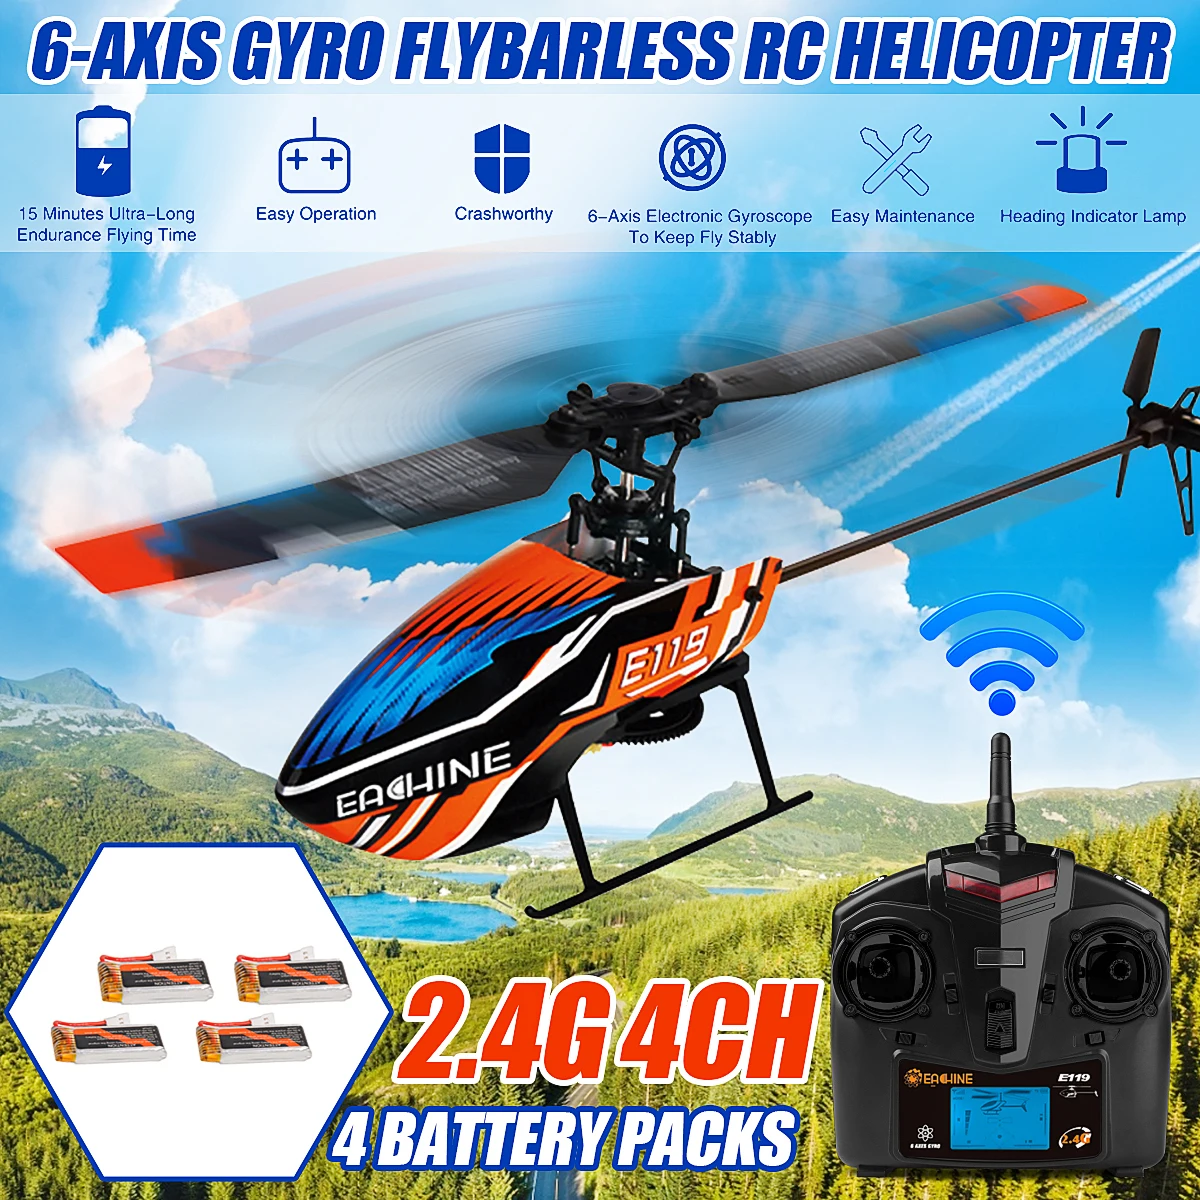 Mode 2 Eachine E119 2.4G 4CH 6-Axis Gyro Flybarless RC Helicopter RTF 